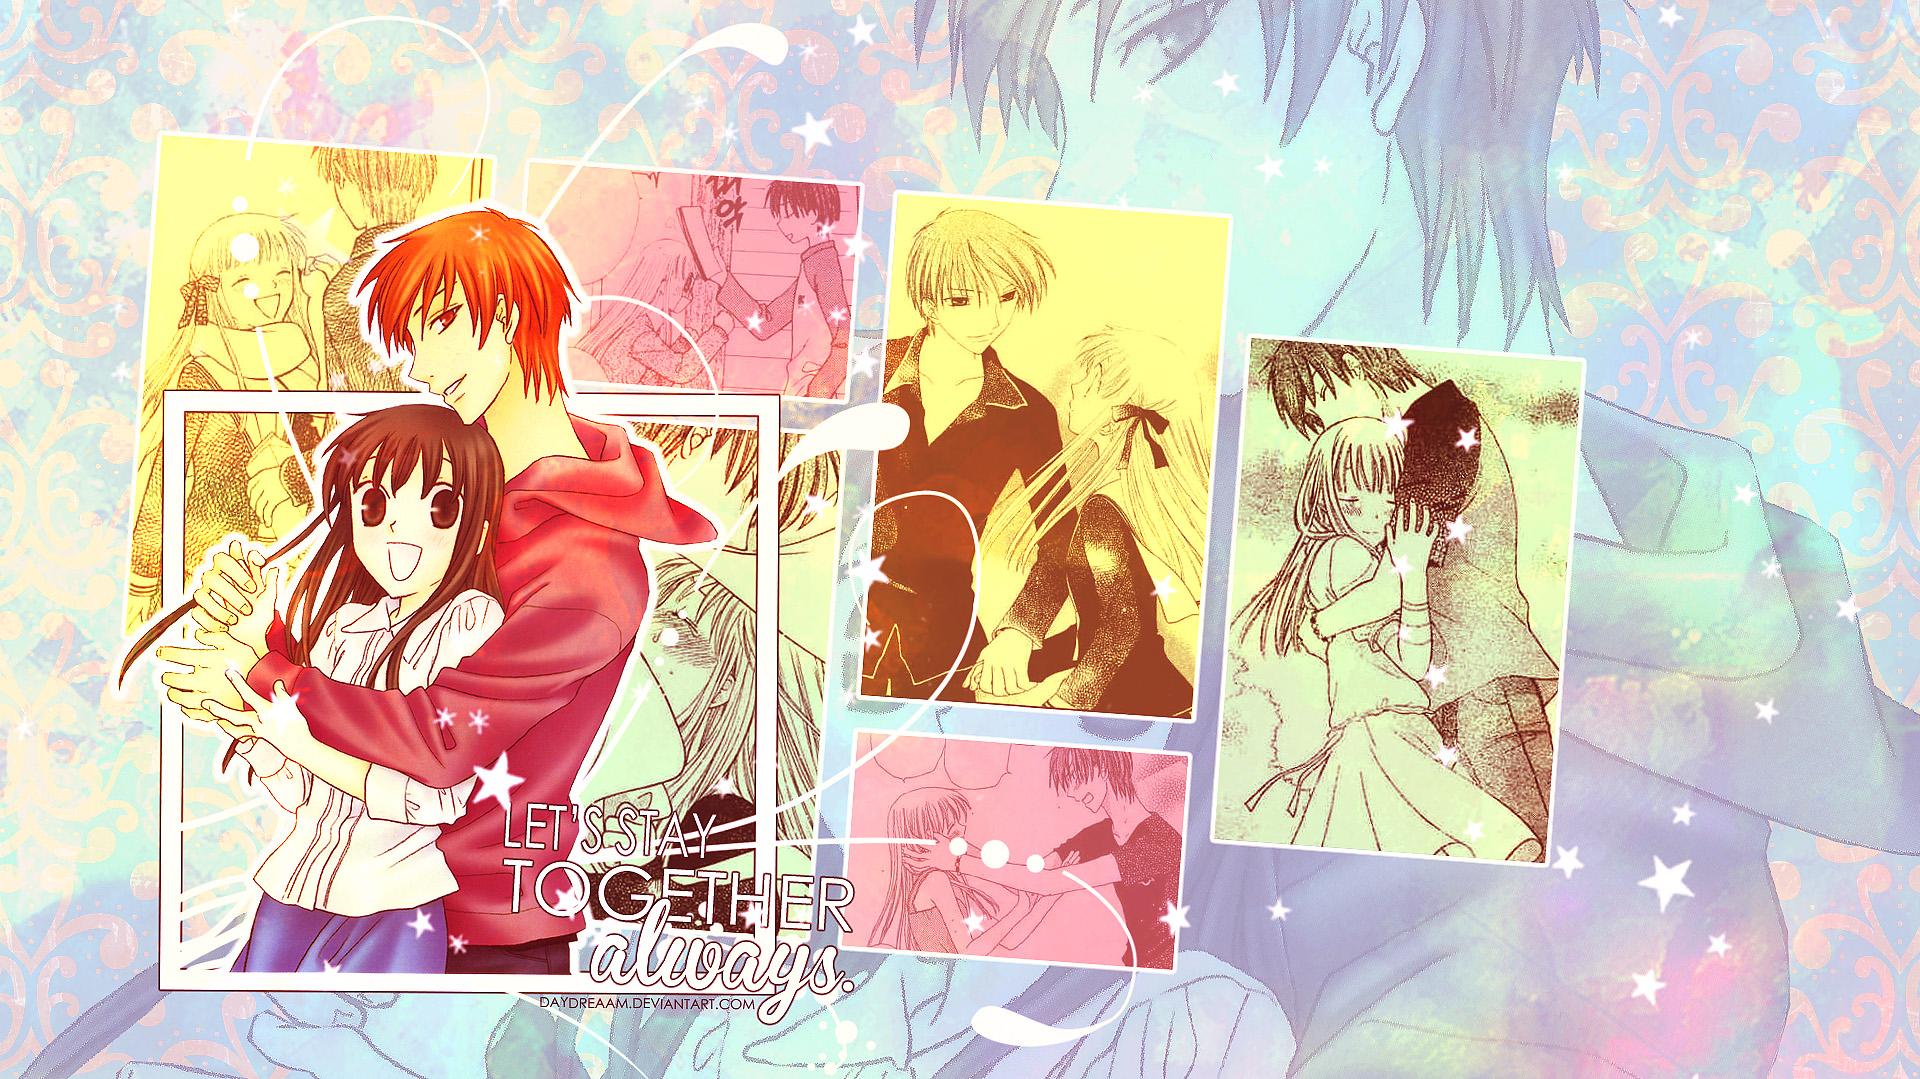 Fruits Basket HD Wallpaper And Background